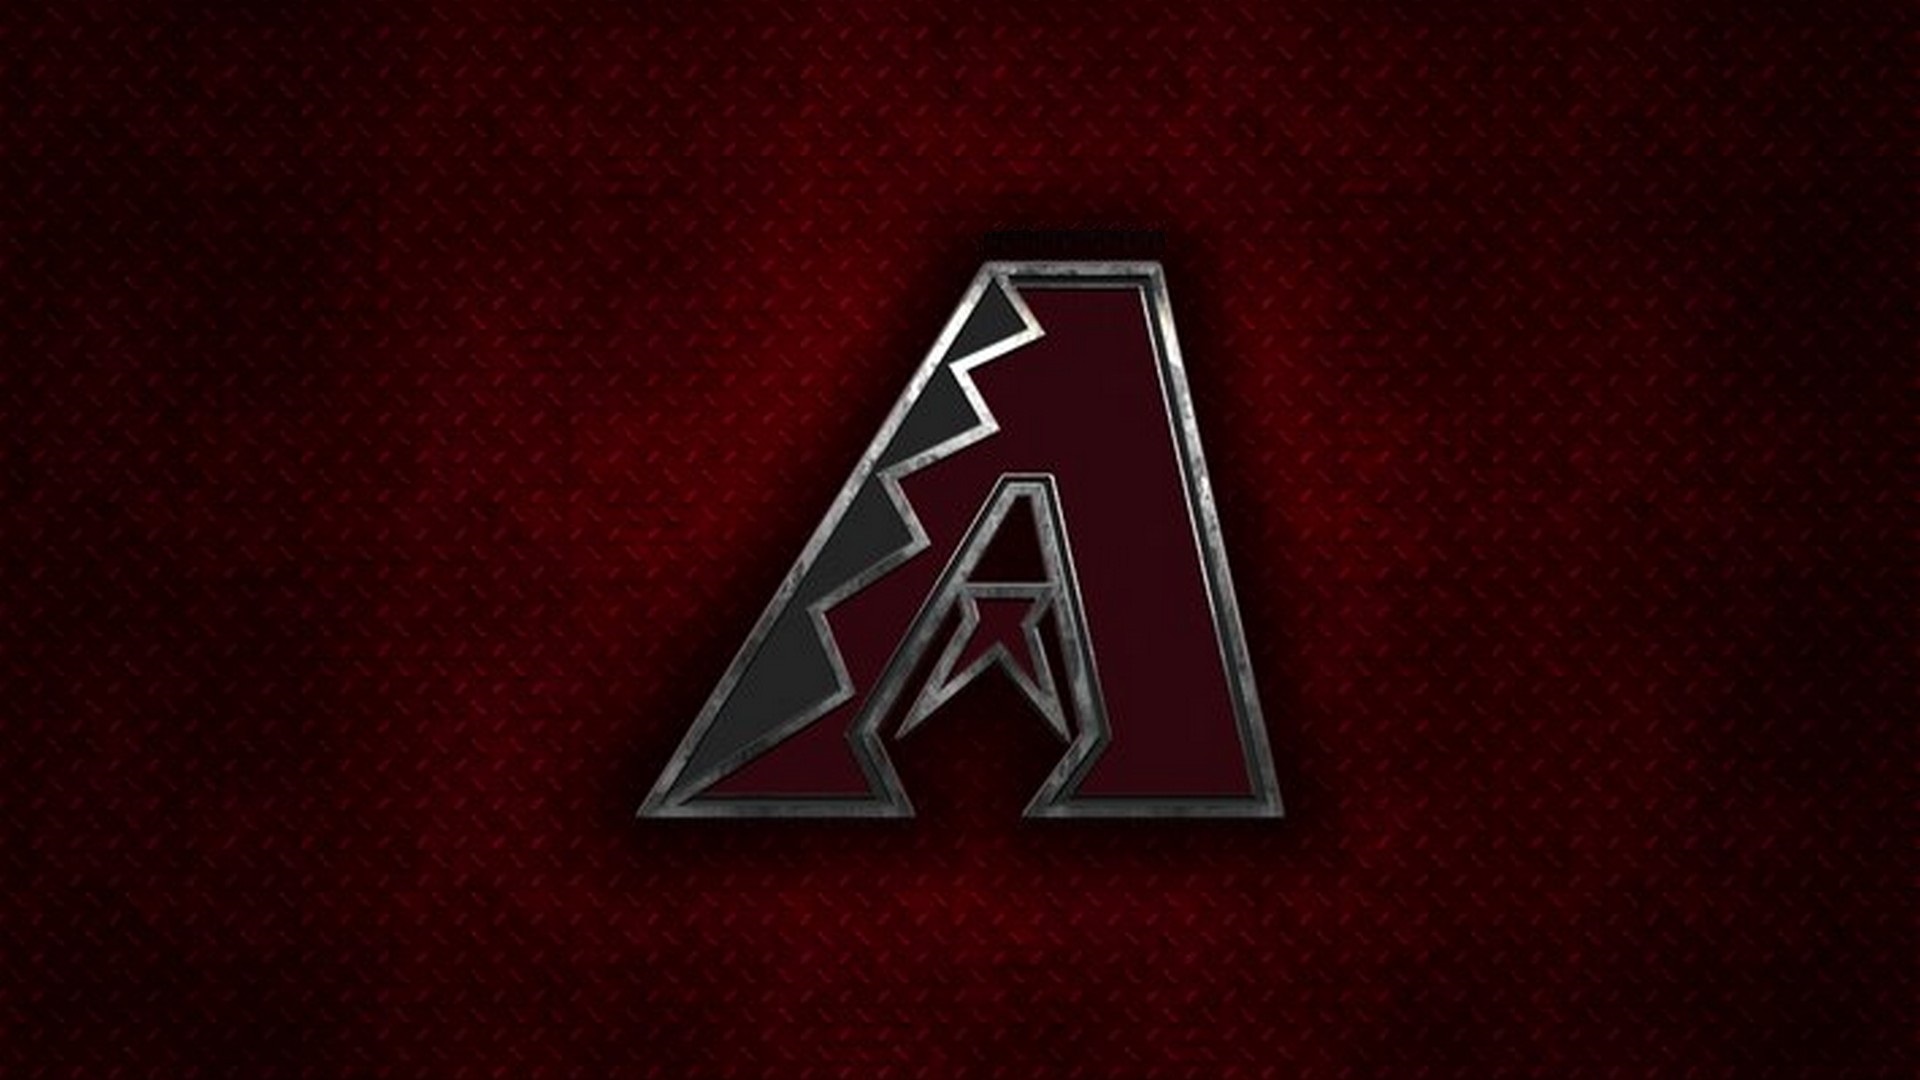 Wallpaper Desktop Arizona Diamondbacks MLB HD with high-resolution 1920x1080 pixel. You can use this wallpaper for Mac Desktop Wallpaper, Laptop Screensavers, Android Wallpapers, Tablet or iPhone Home Screen and another mobile phone device